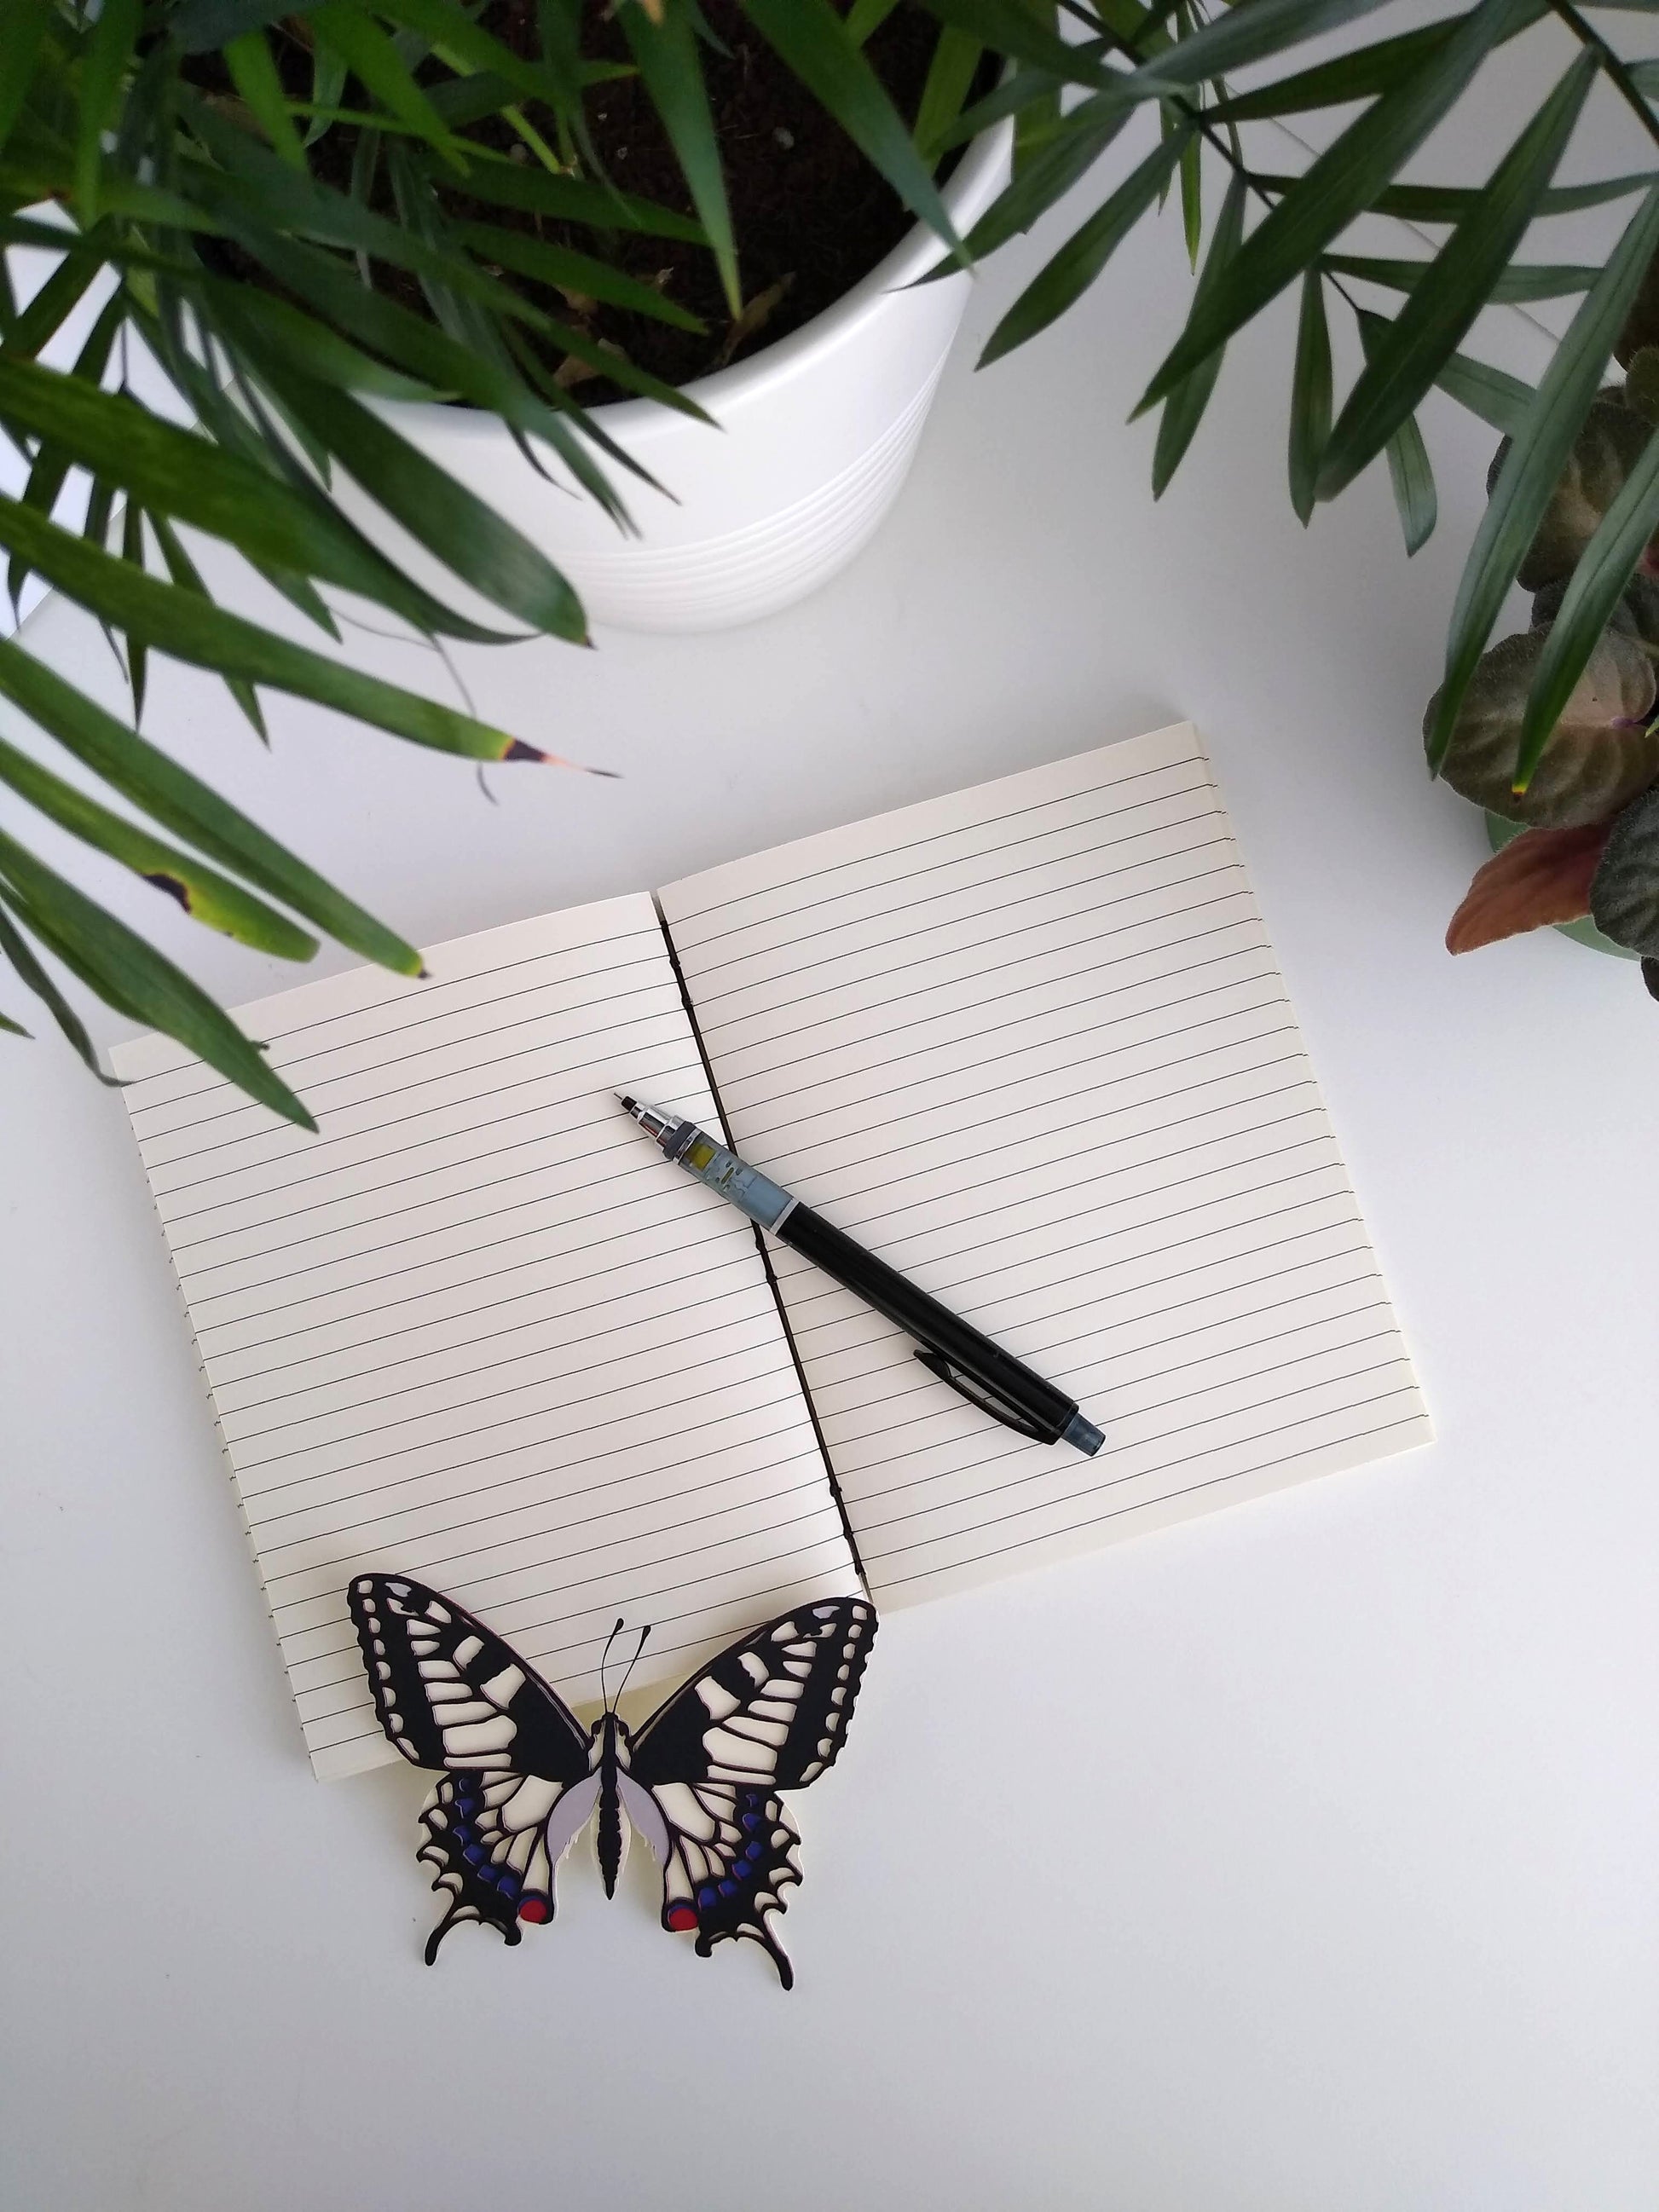 An open journal lays on a white desk next to two potted plants and a paper butterfly. The journal has a grey thread connecting the pages at the spine and a black mechanical pencil rests across the lined, cream pages.